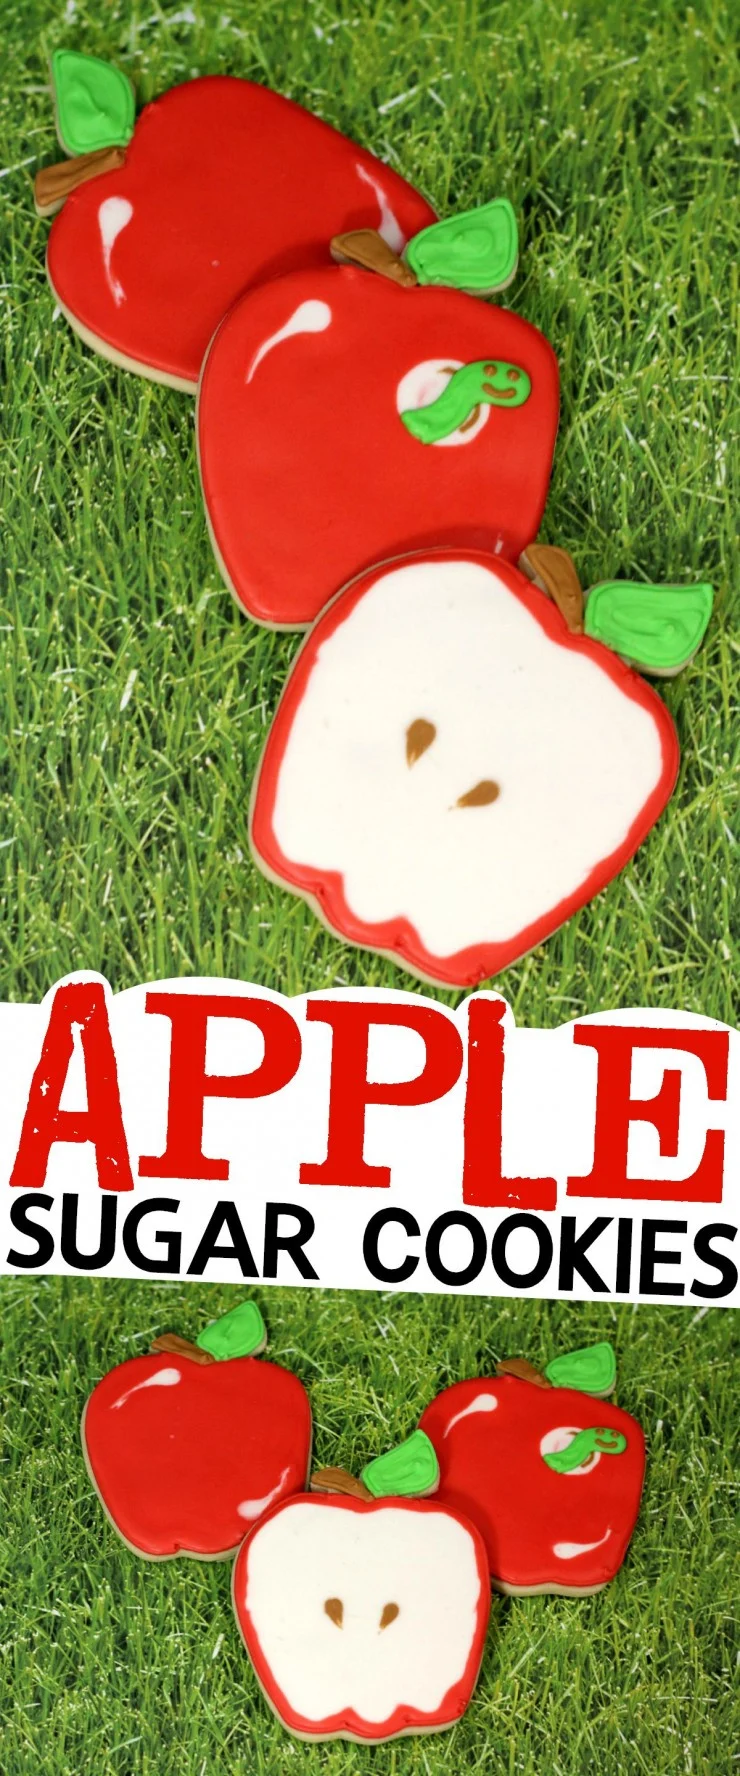 How to decorate these adorable Apple Sugar Cookies + recipe for cookies and icing!